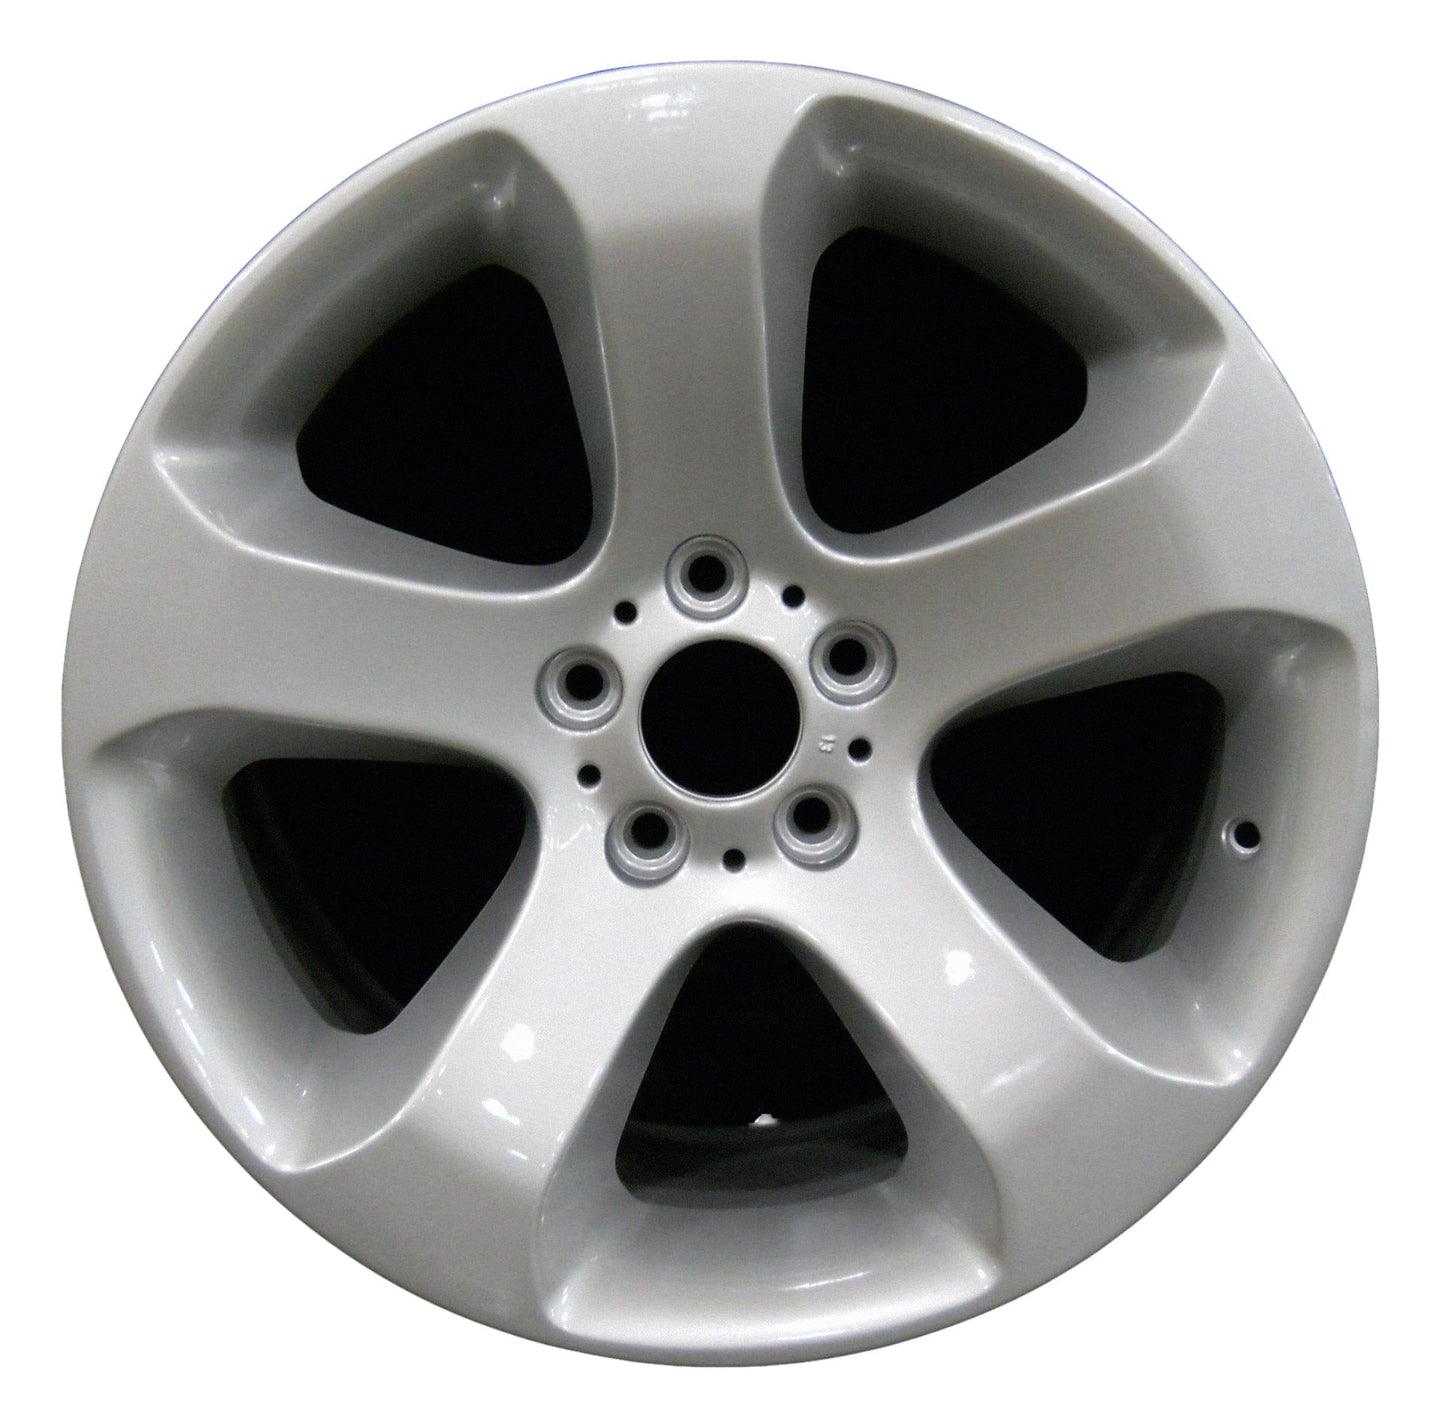 BMW X5  2002, 2003, 2004, 2005, 2006, 2007 Factory OEM Car Wheel Size 19x10 Alloy WAO.59448RE.PS06.FF